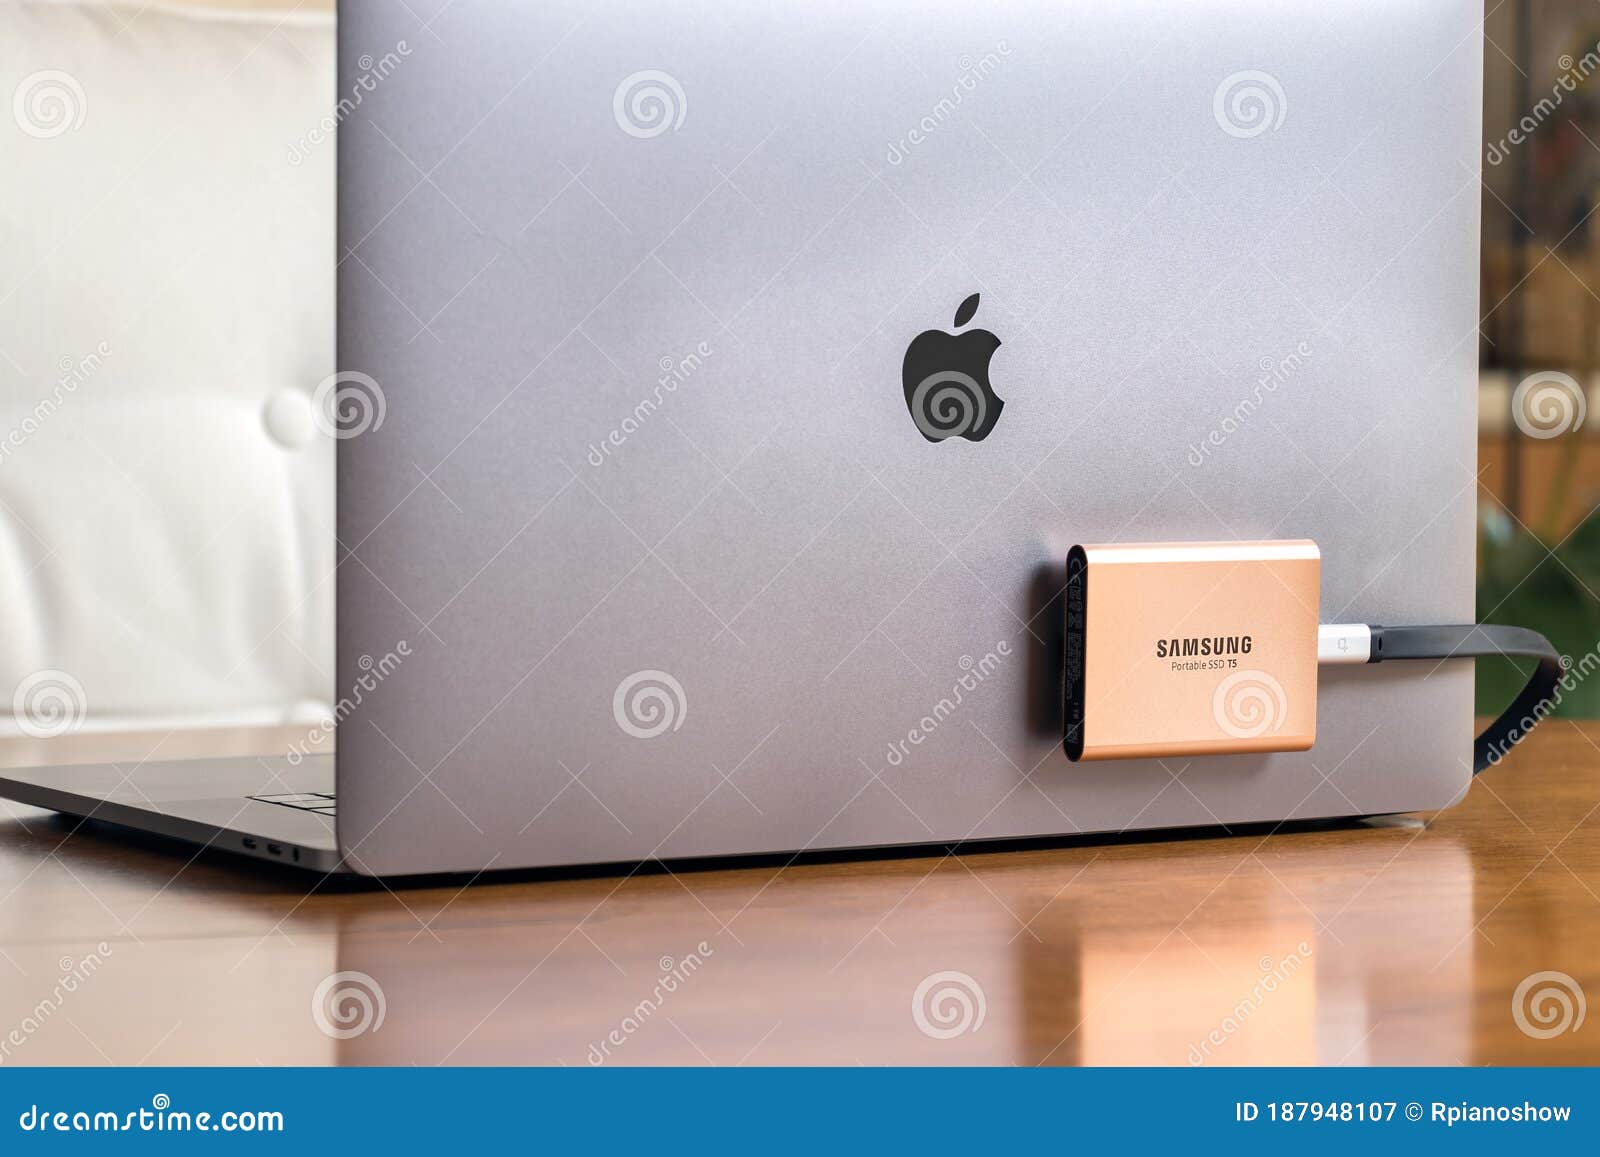 A Samsung T5 Portable SSD Drive To a Macbook Pro Laptop. Editorial Photography - Image of port, equipment: 187948107